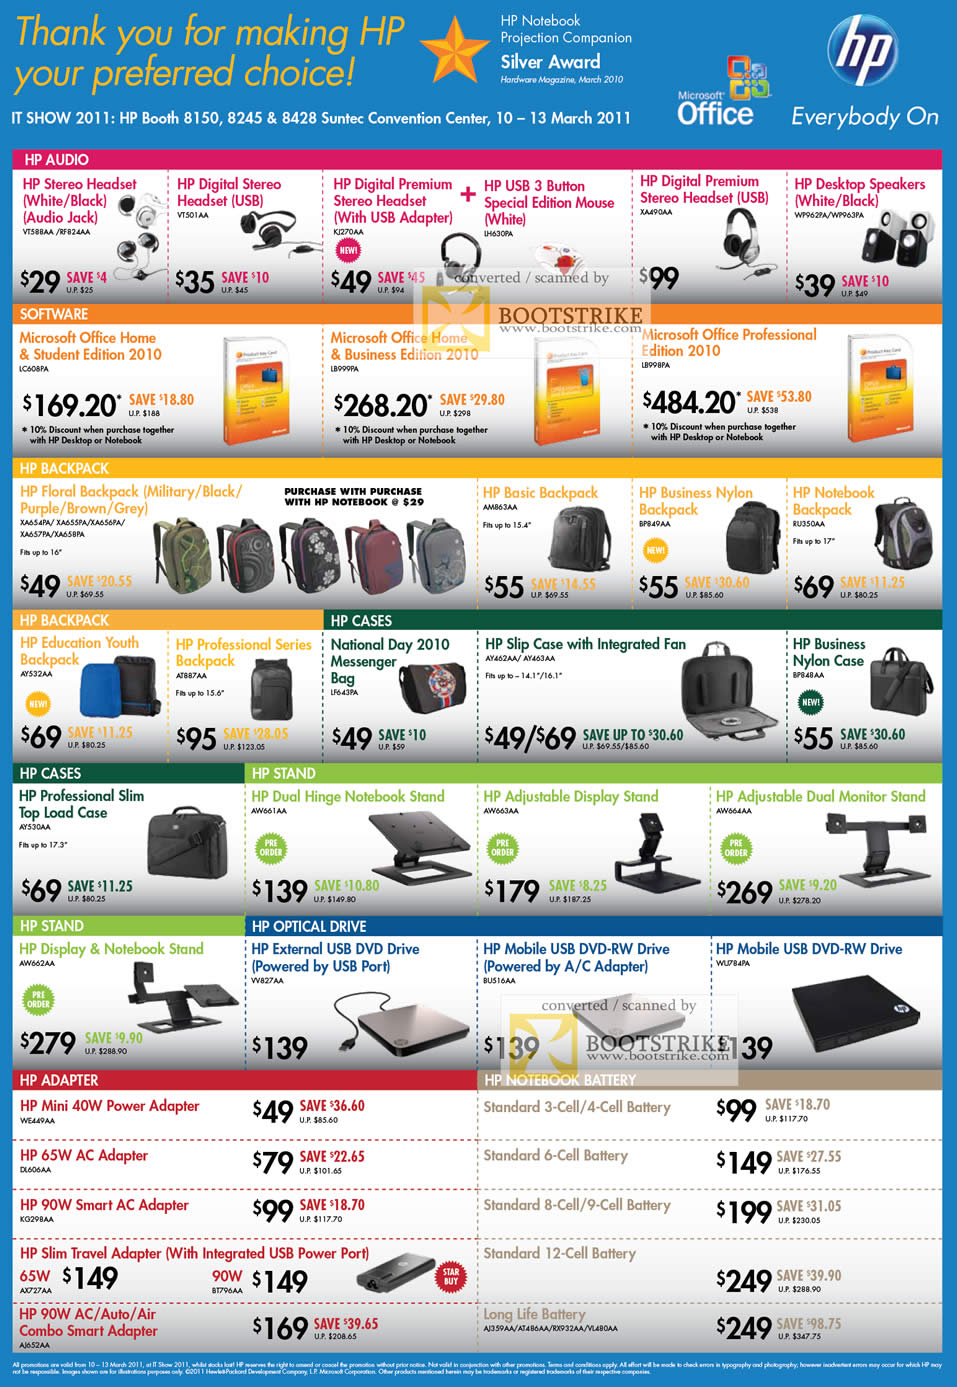 IT Show 2011 price list image brochure of HP Accessories Headset Mouse Microsoft Office Home Business Professional Backpack Case Stand Optical Drive Adapter Battery